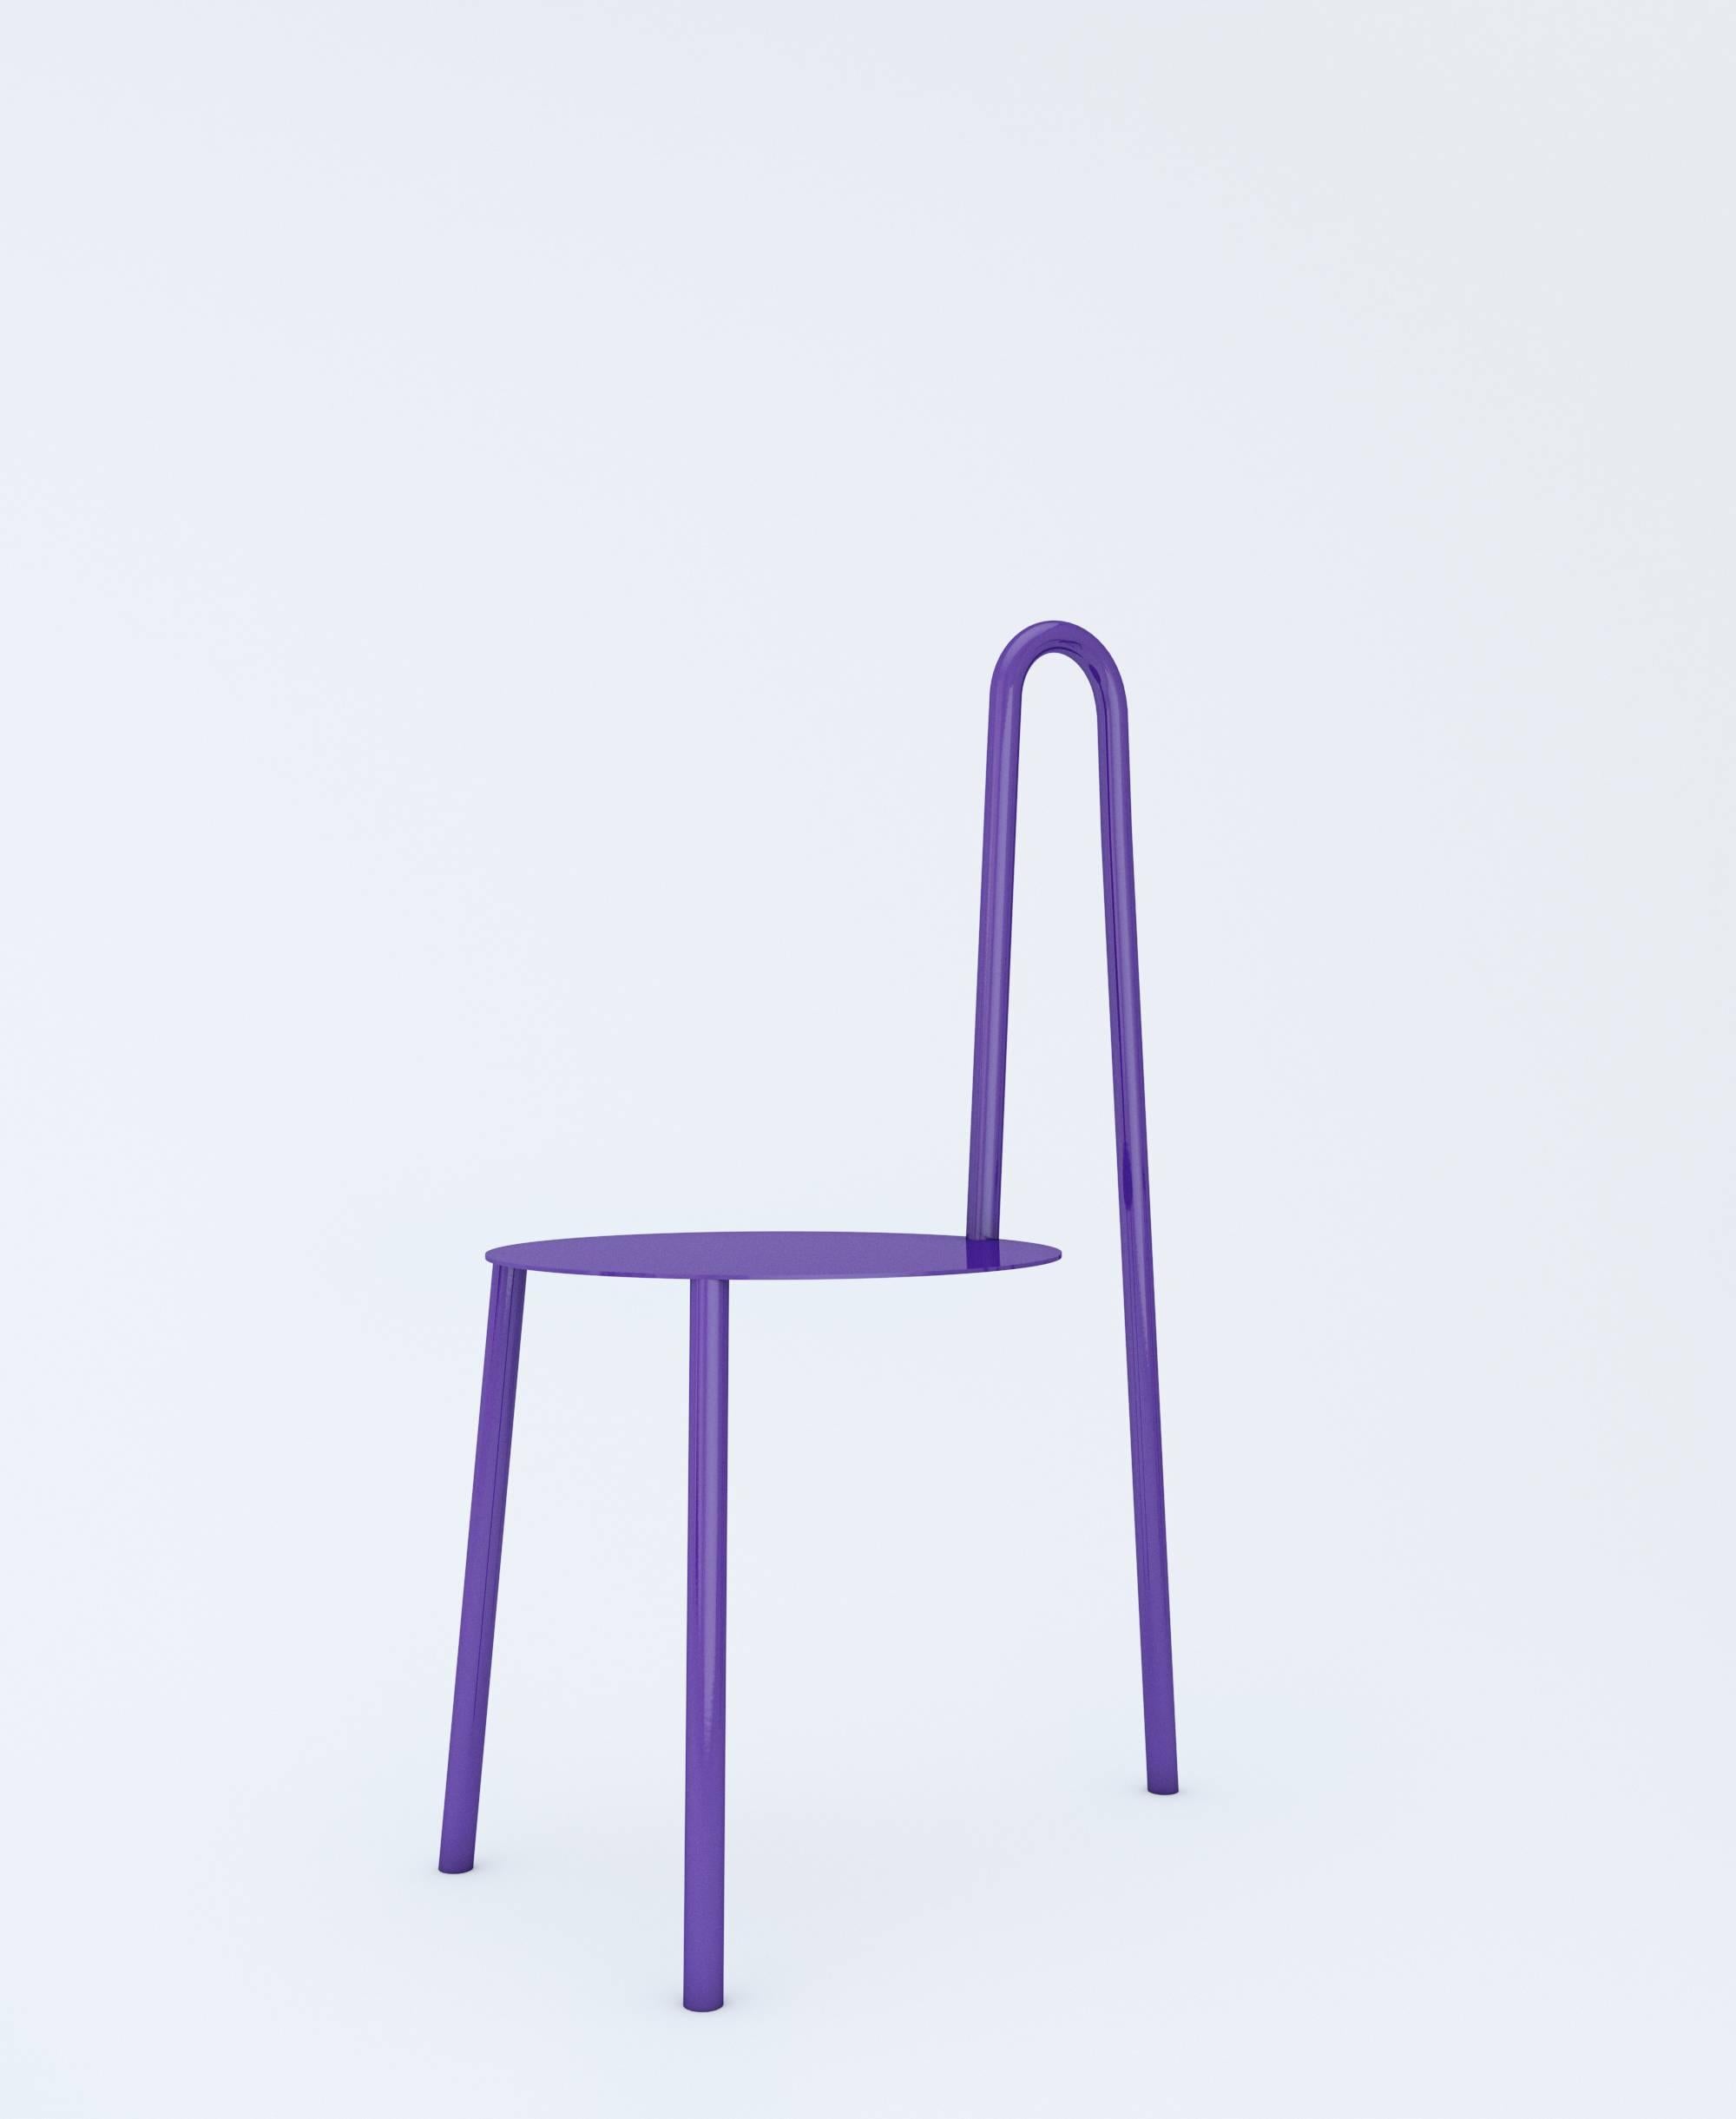 Contemporary Chair by Crosby Studios, Metal with Purple Powder Coating, 2018 For Sale 1